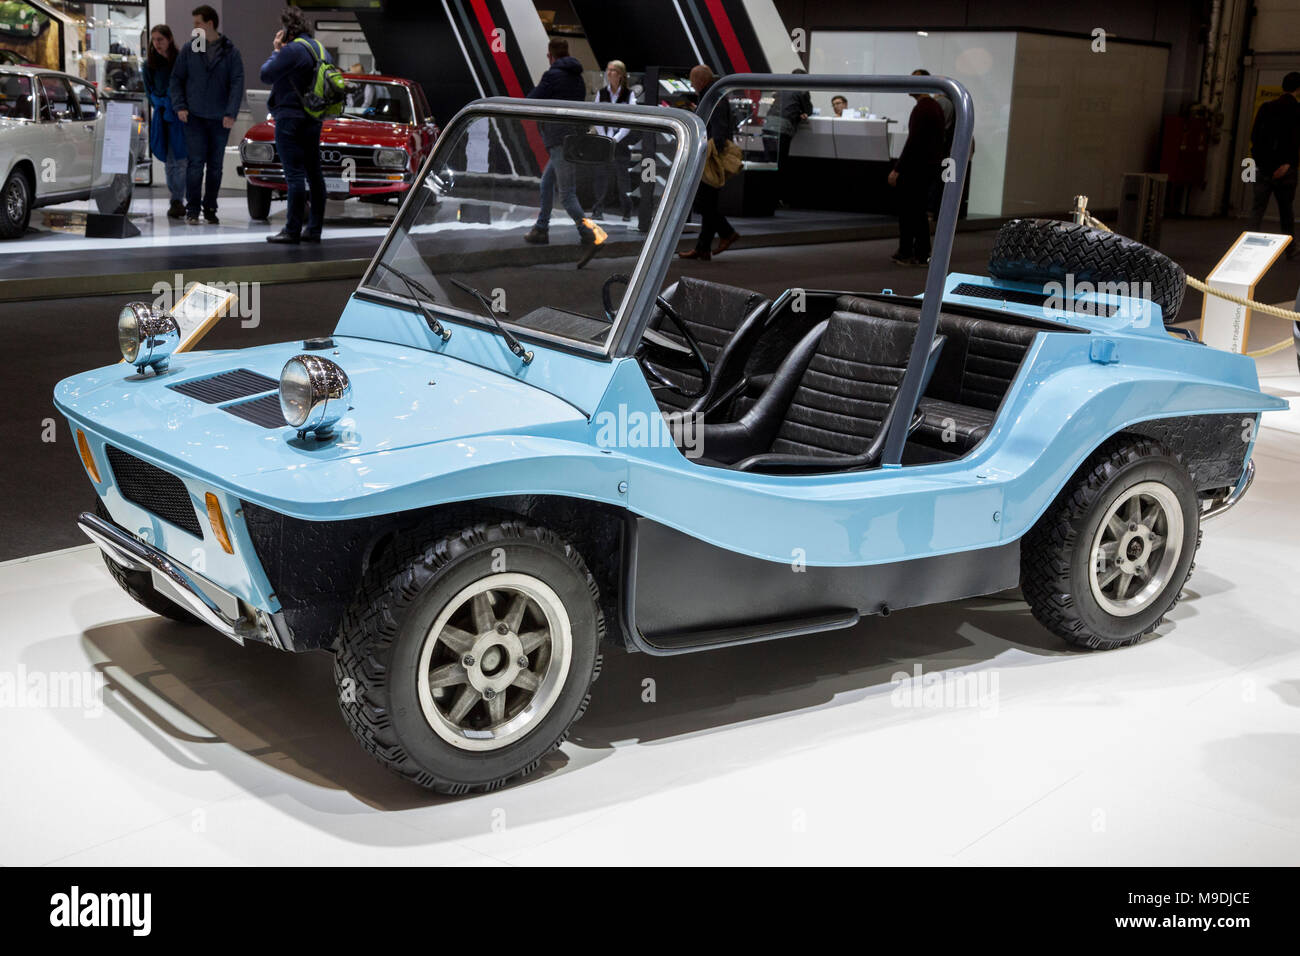 Light blue Skoda buggy. Techno-Classica Essen is the world leading automobile show for classic and vintage cars and collectible automobiles. In 2018, the motor show attracted over 185,000 visitors. More than 1,250 exhibitors from over 30 countries take part. Stock Photo